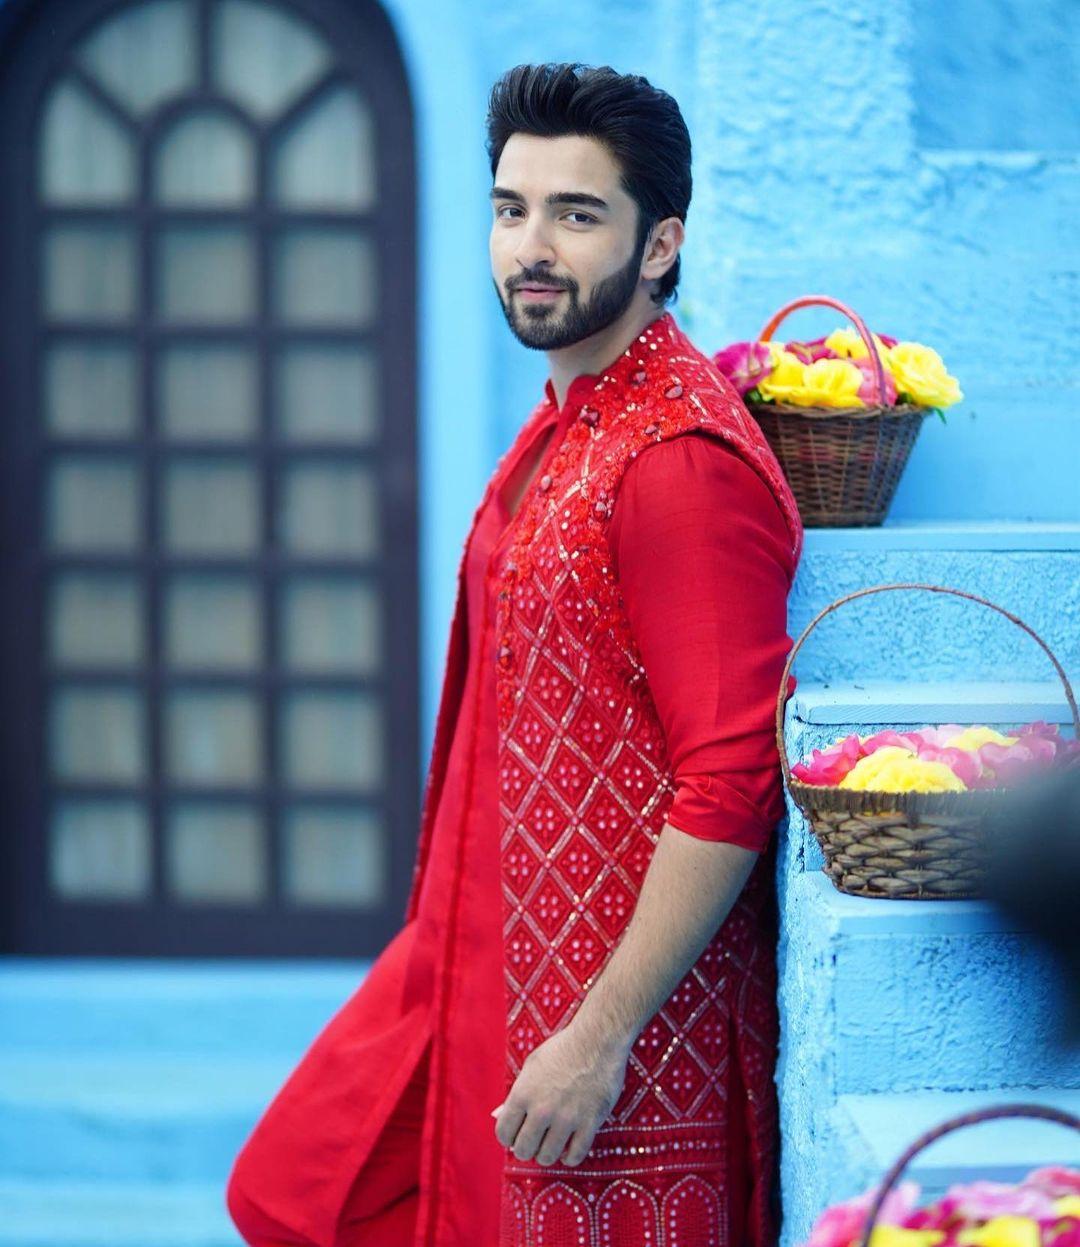 In one striking look, Rohit Suchanti wore a stylish all-red kurta paired with pyjama and an embroidered matching sherwani